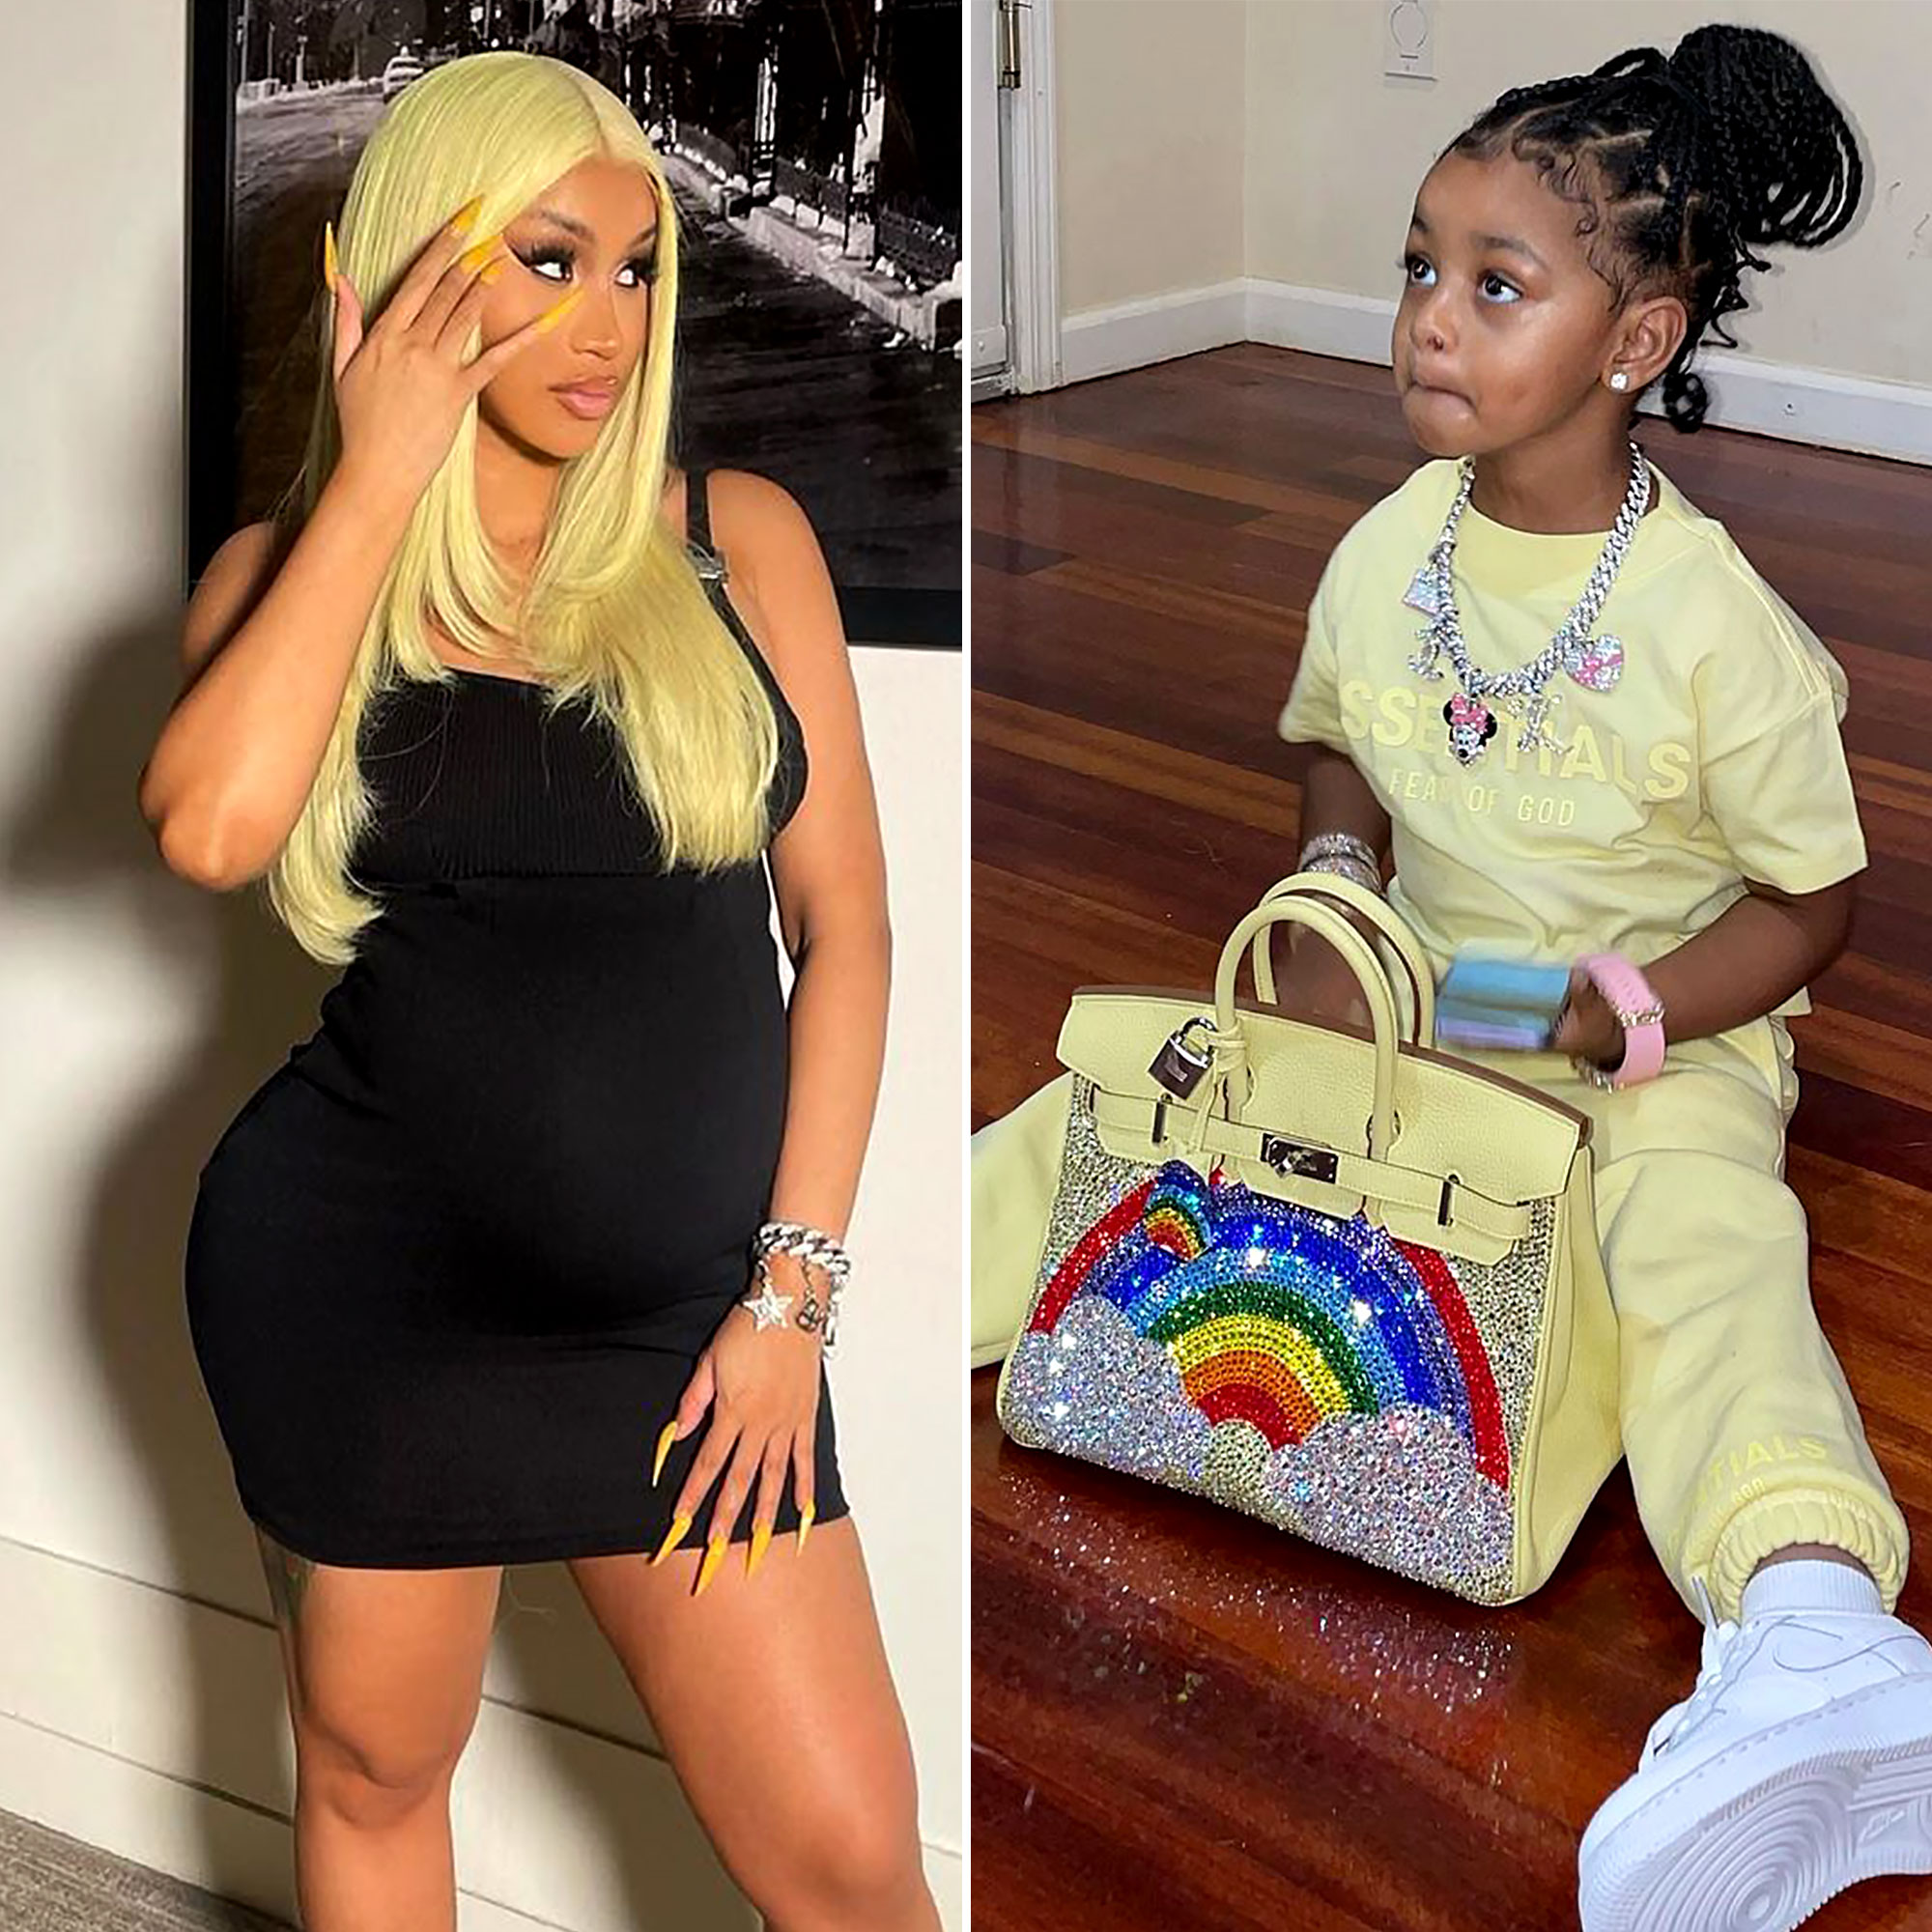 Baby bling! Cardi B and husband Offset's daughter Kulture gets